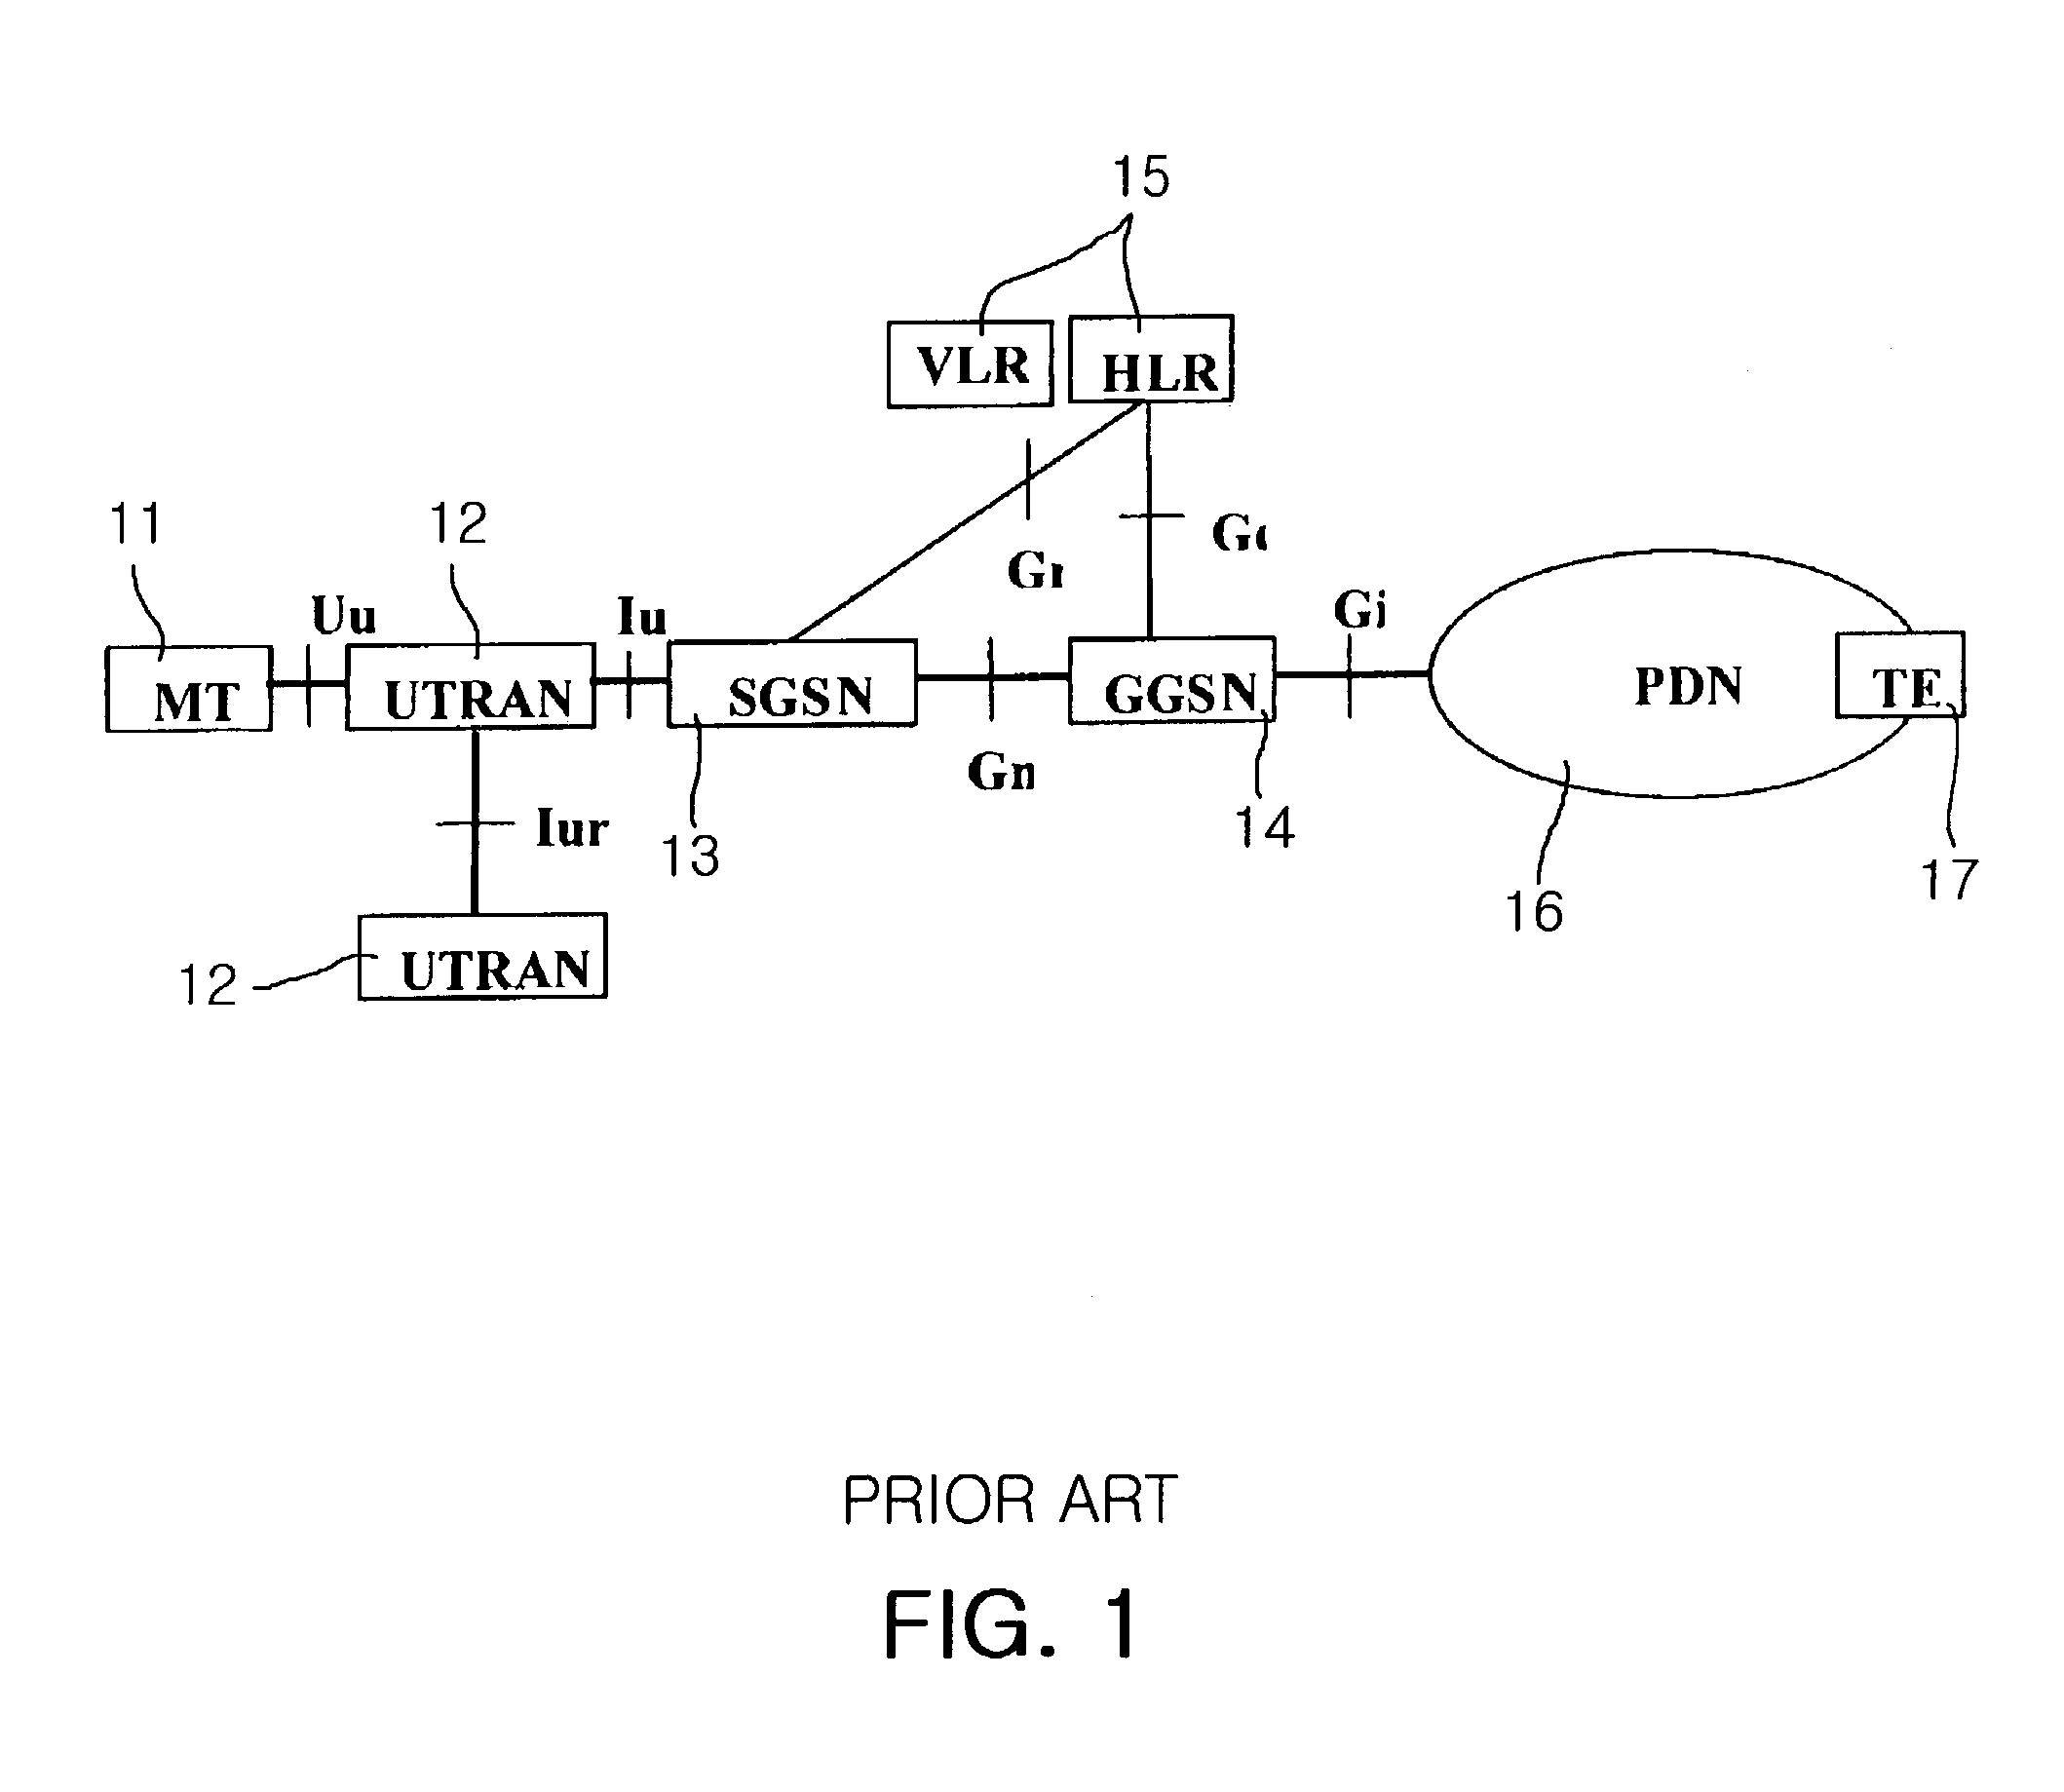 Method for transmitting packet in wireless access network based on wavelength identification code scheme